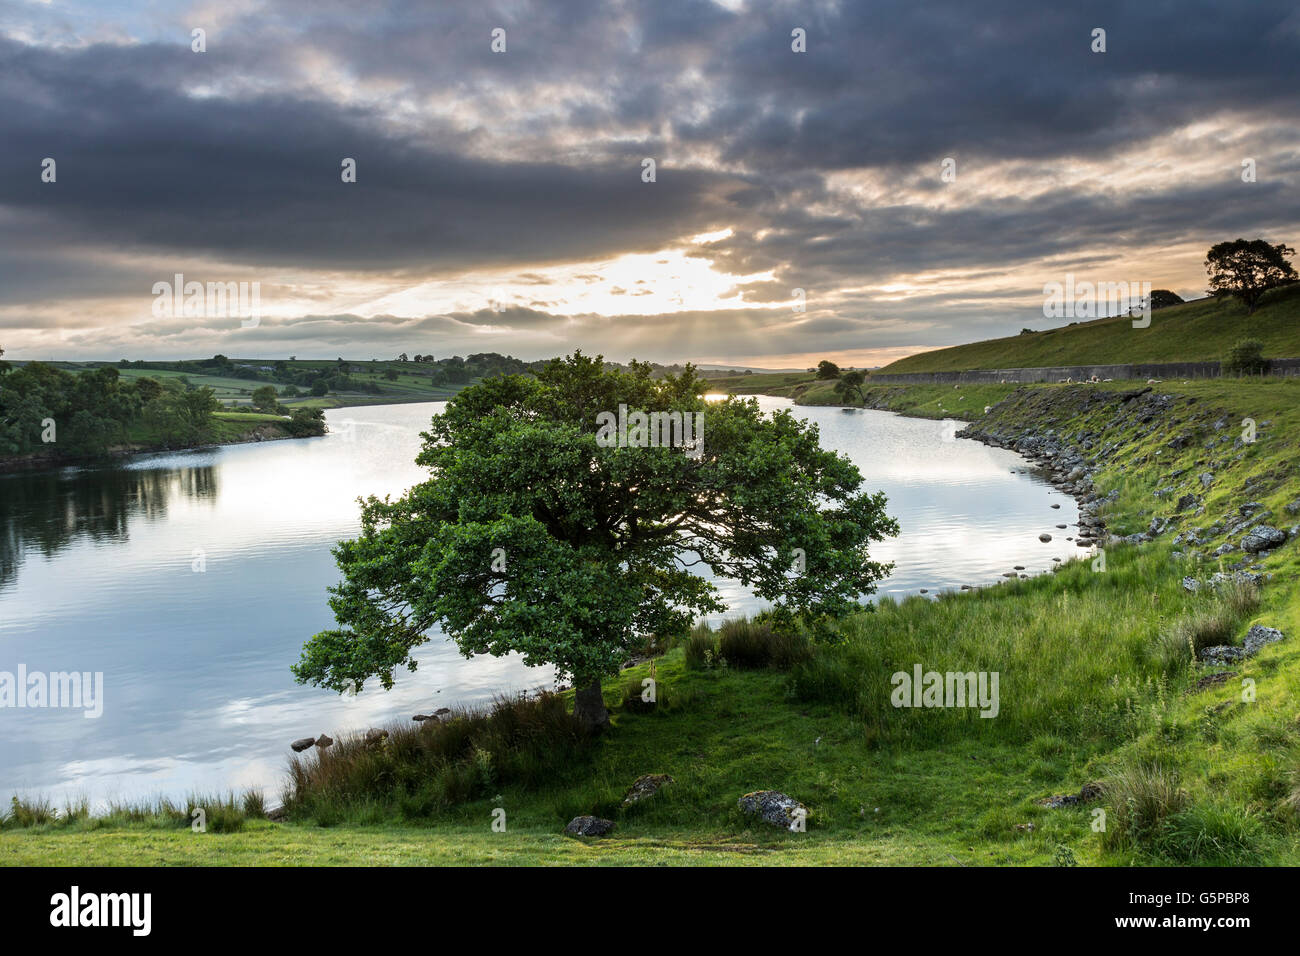 Hury Reservoir, Baldersdale, County Durham, UK. Wednesday 22nd June 2016. UK Weather. It was a cloudy start to the day in northern England, but there was a hint of the brightness to come as the day progresses. Stock Photo